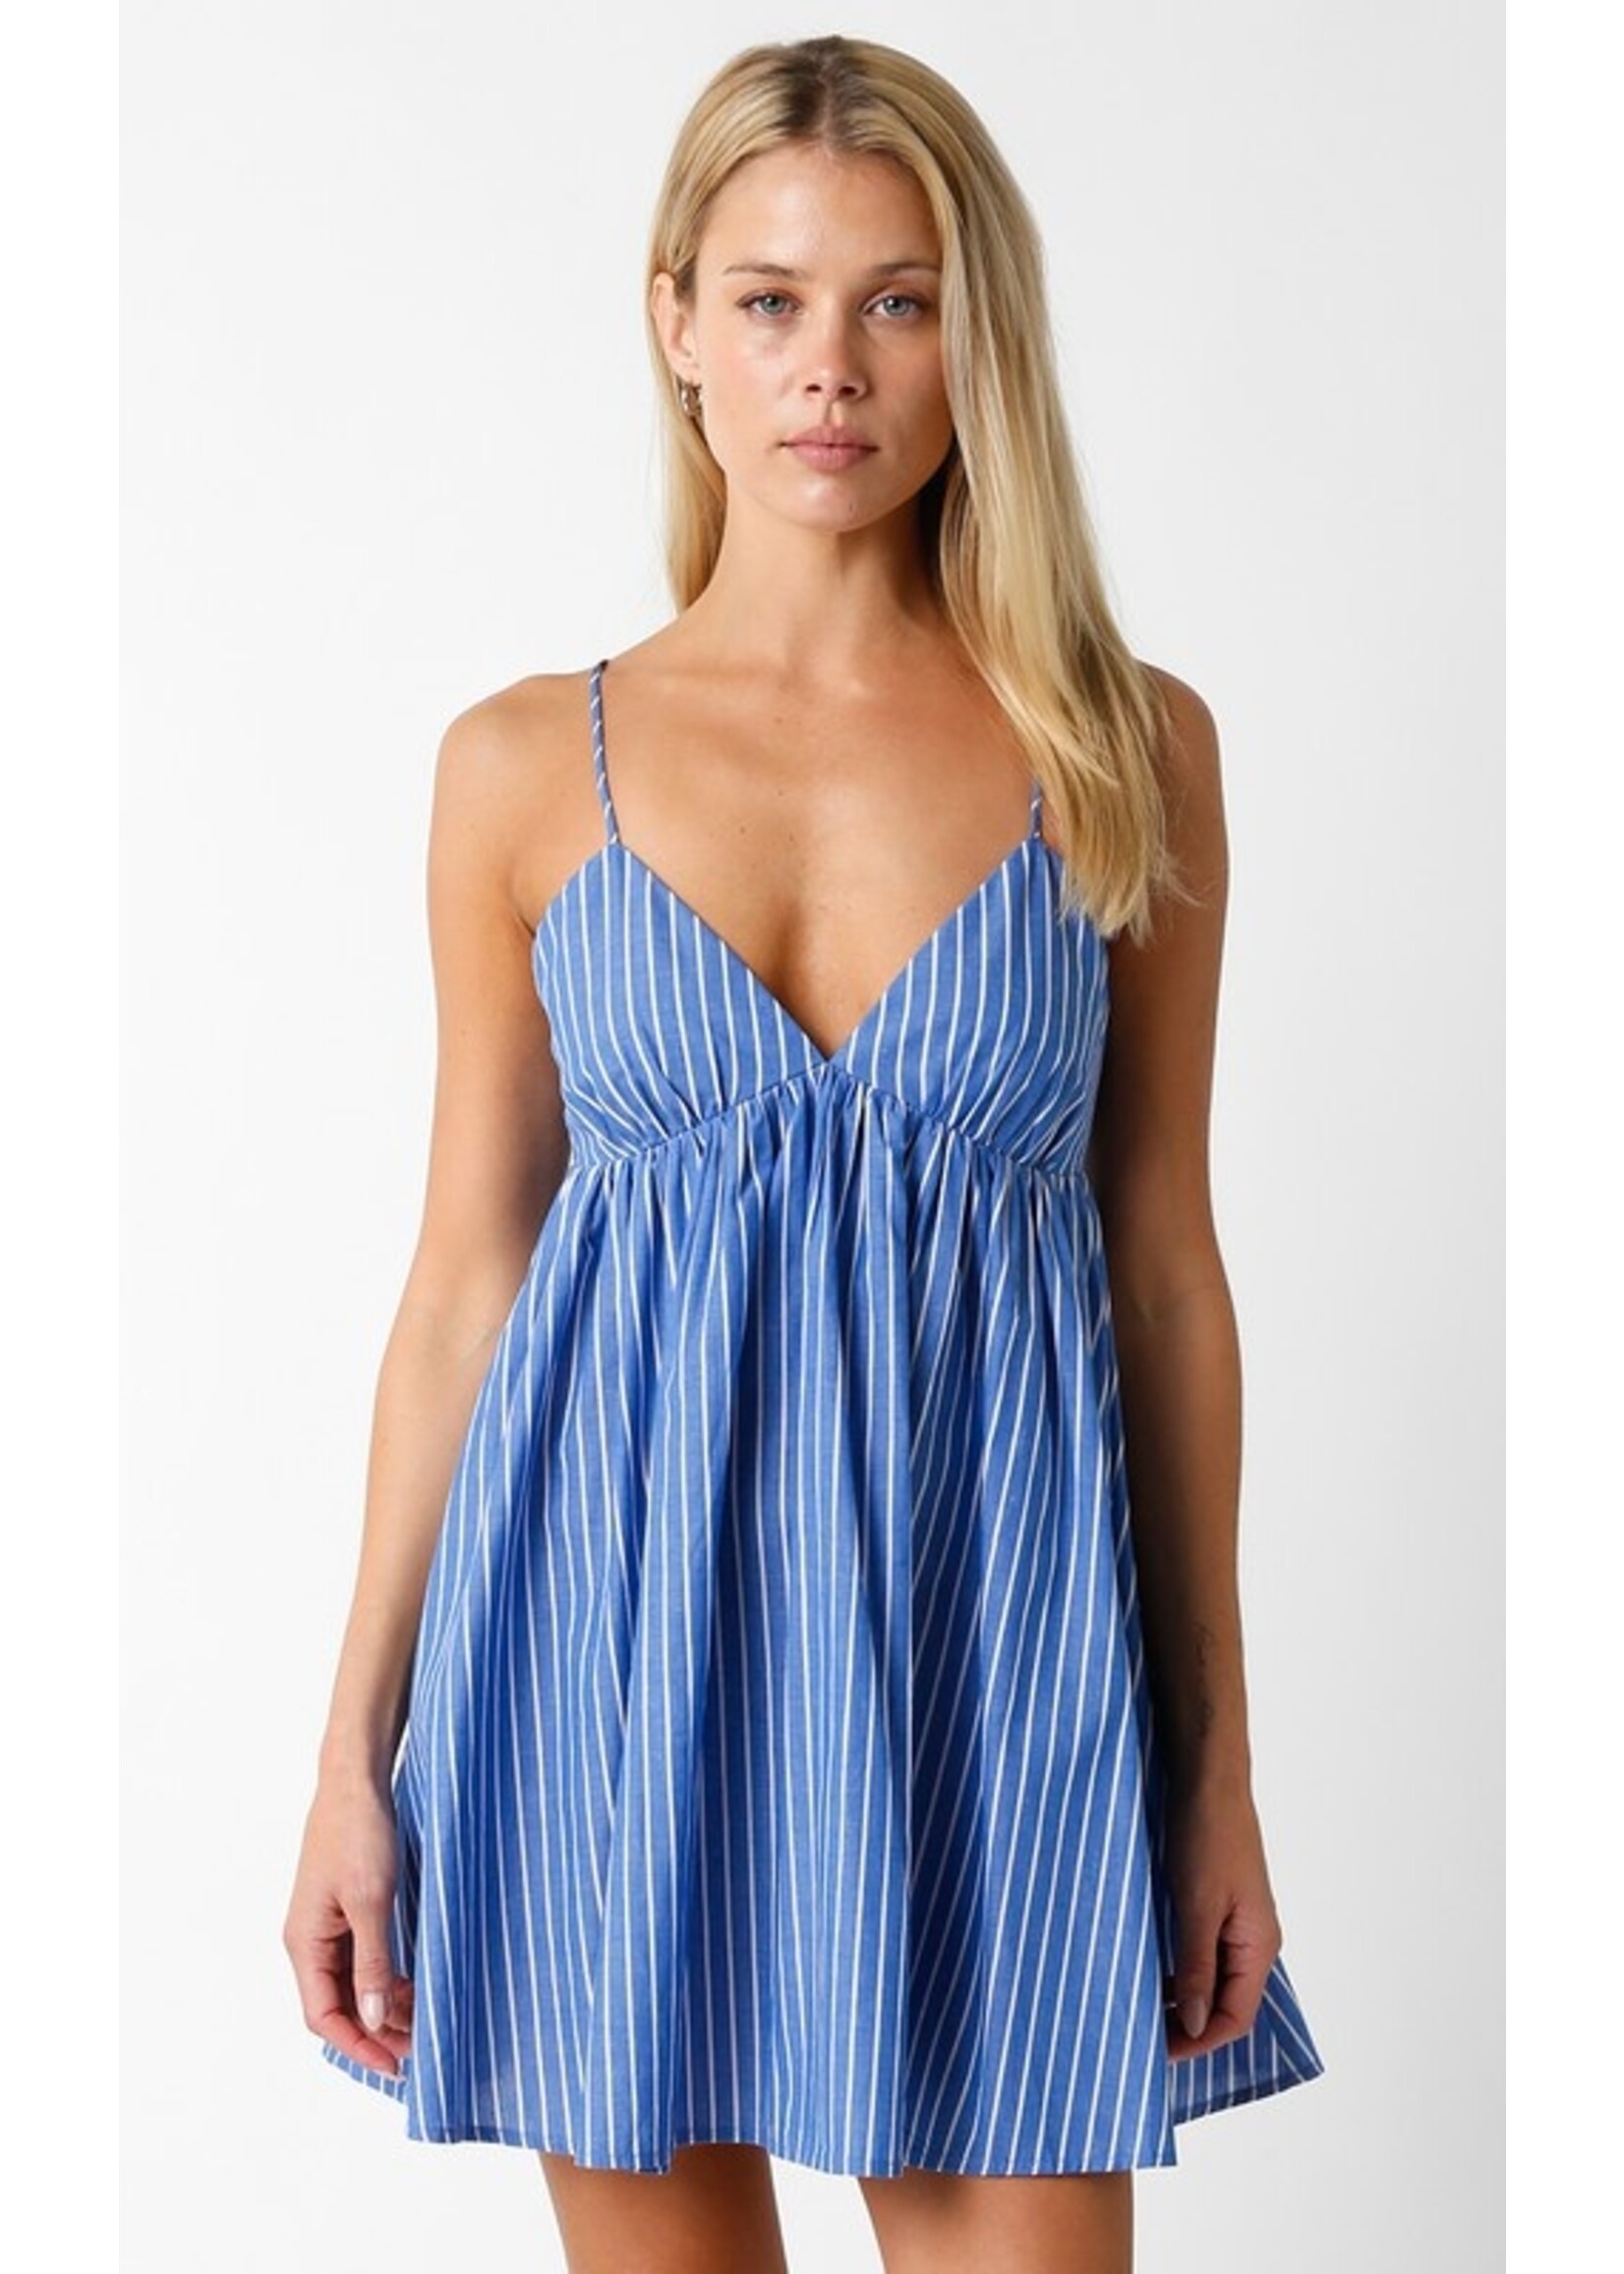 Olivaceous Olivaceous Blue White Strappy Dress